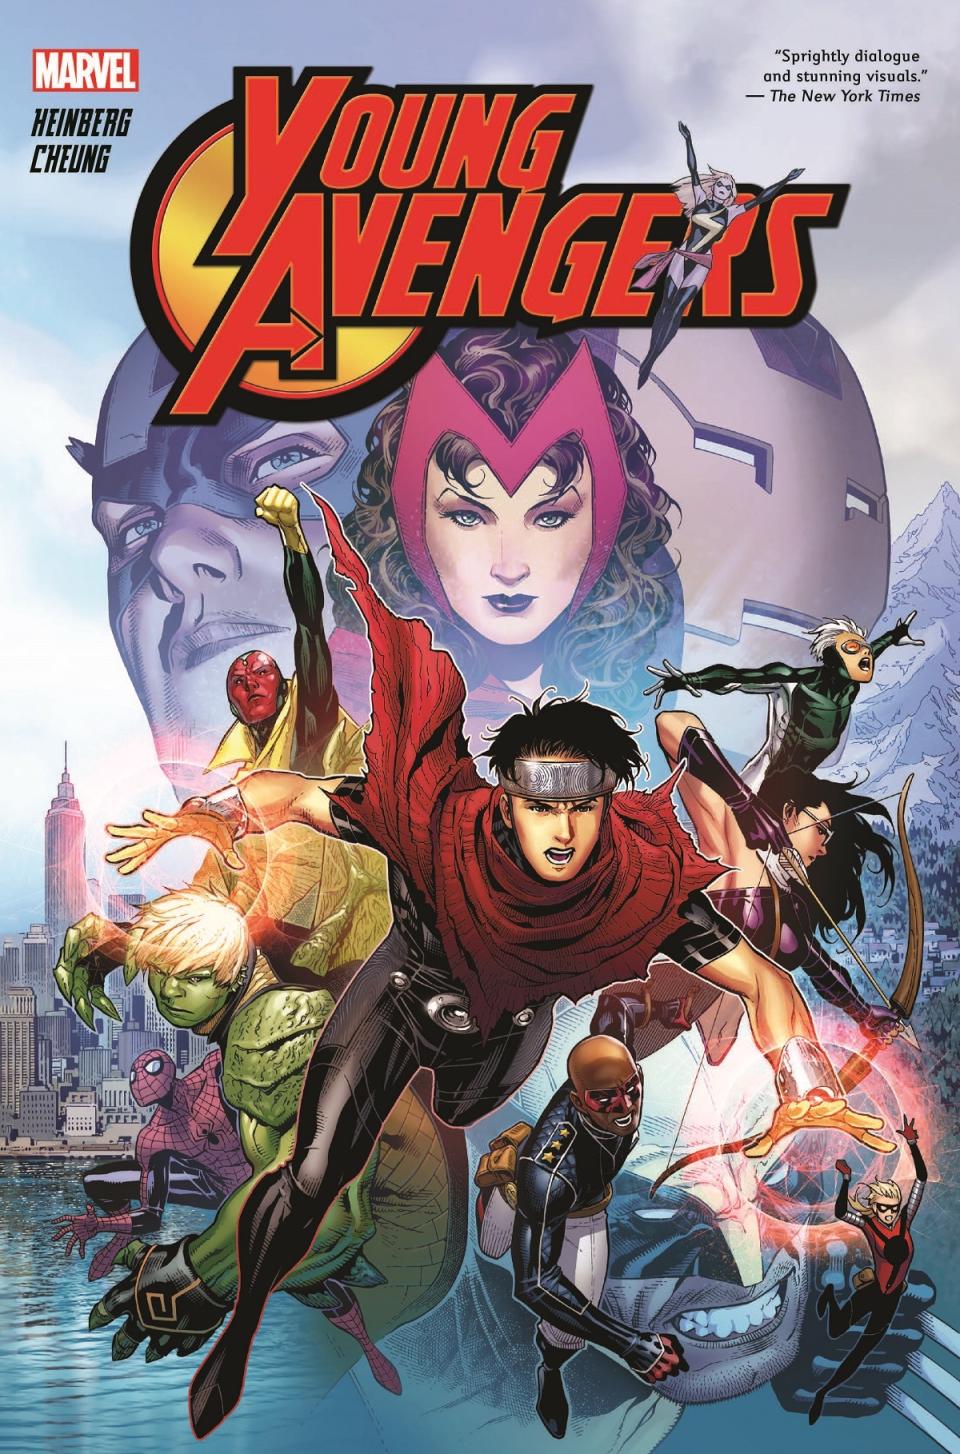 The cover for Marvel Comics' Young Avengers Omnibus featuring the team in varies poses